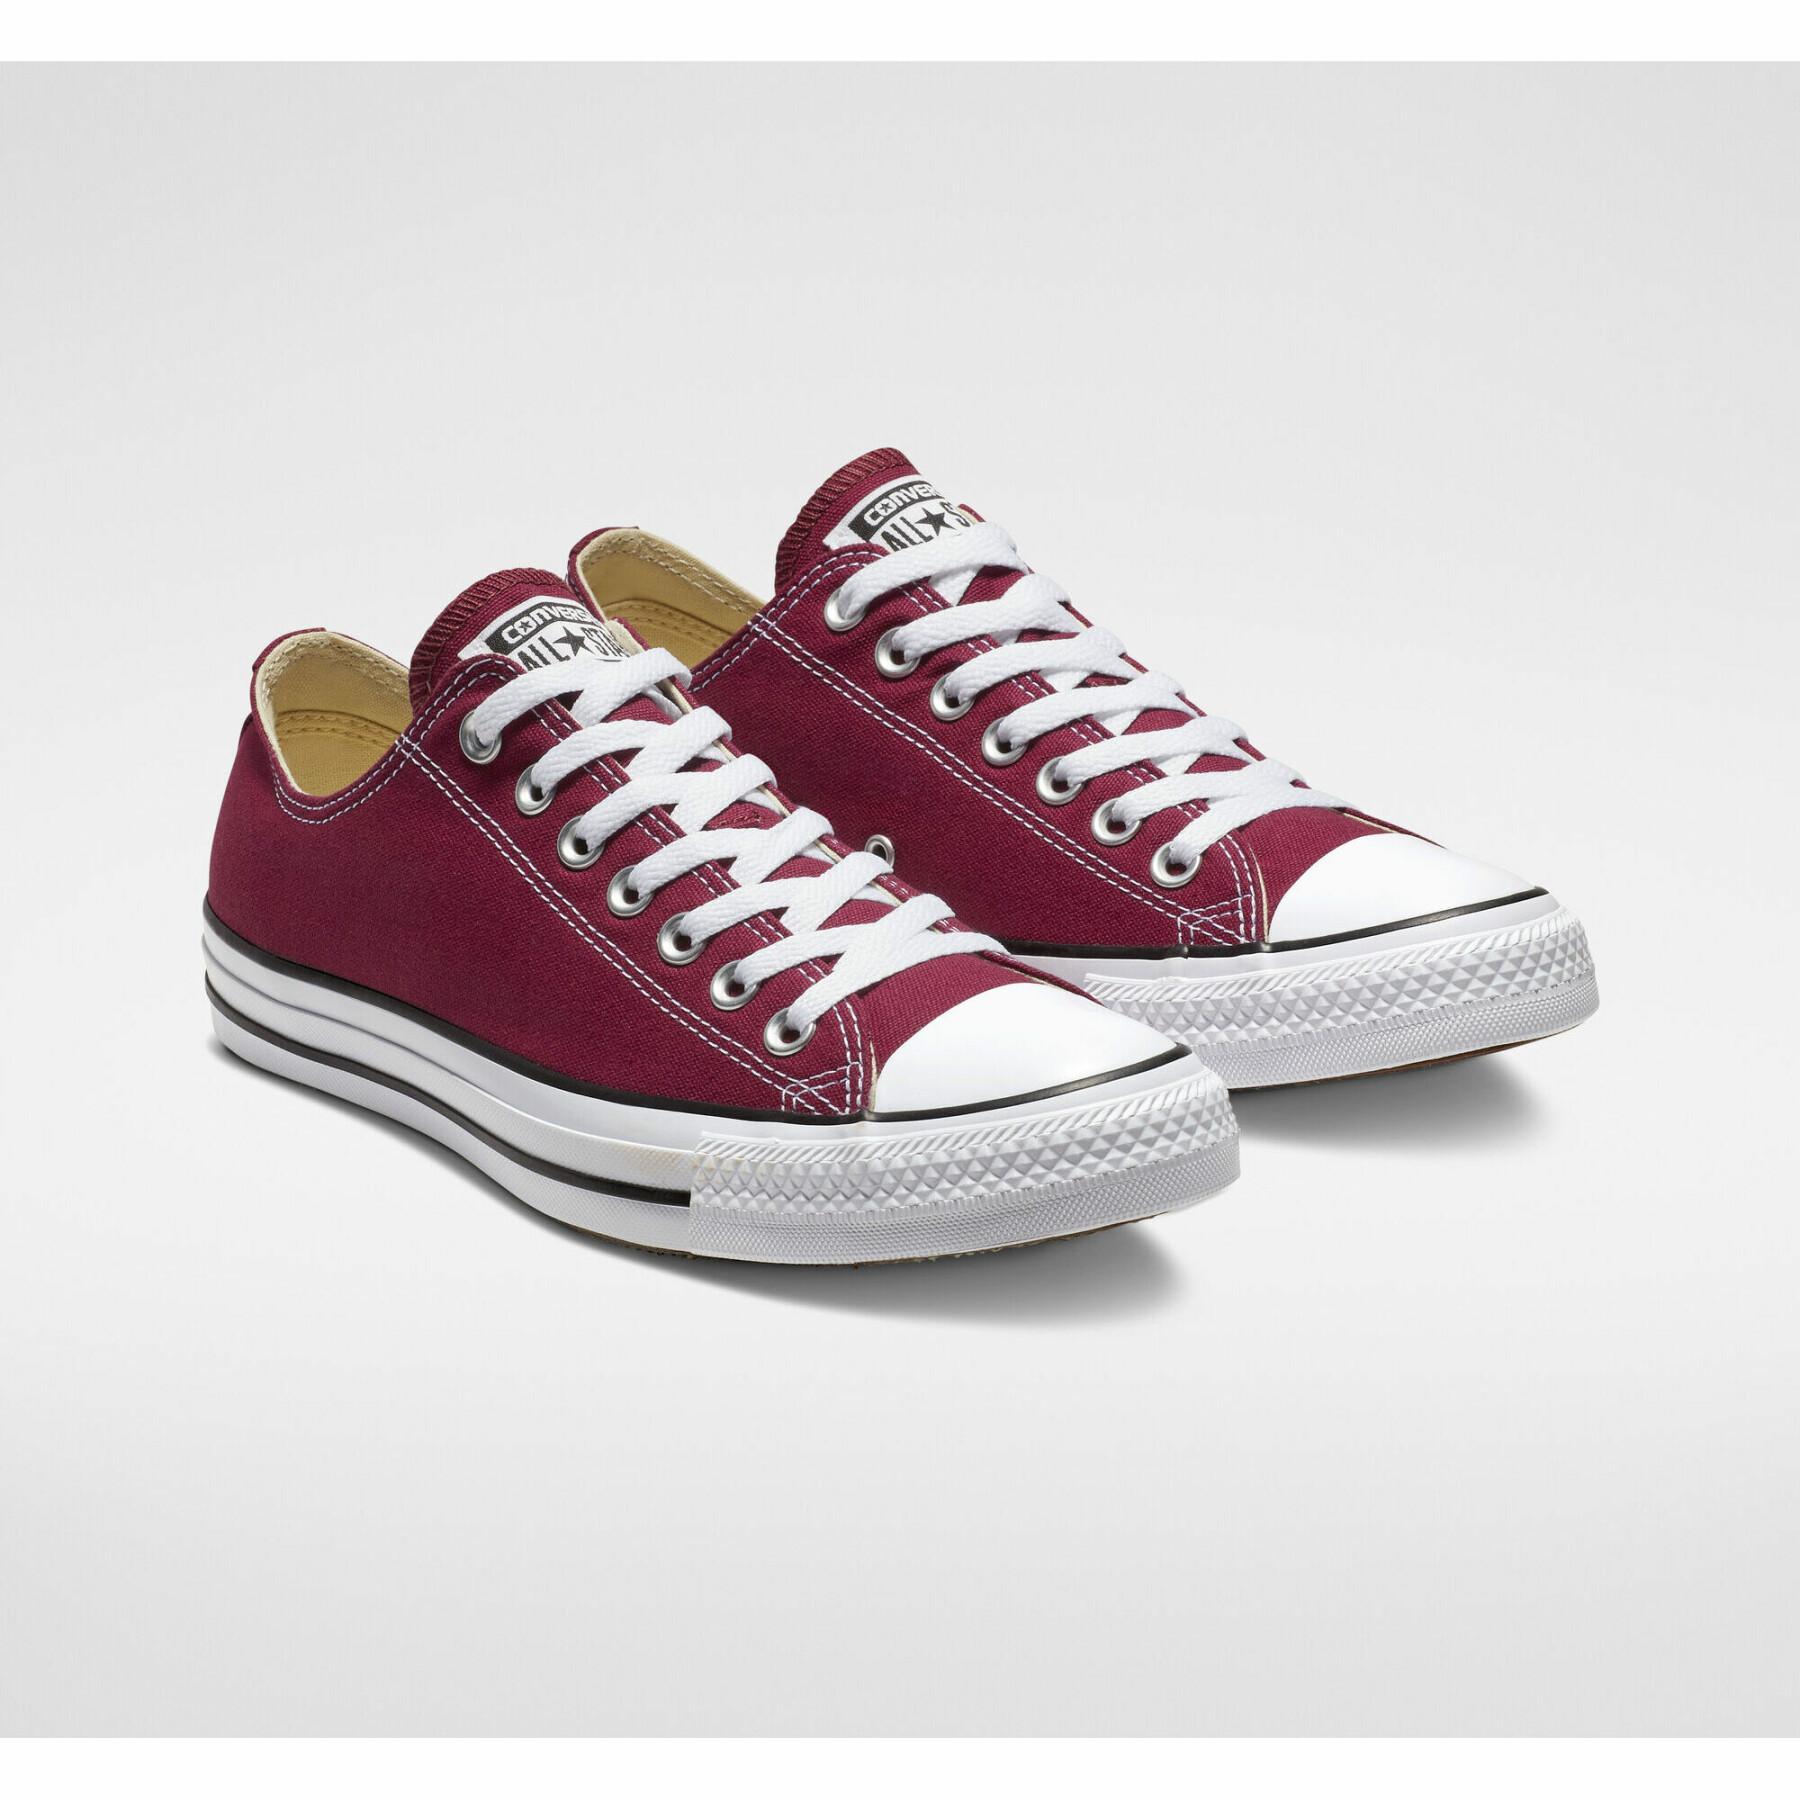 Formadores Converse Chuck Taylor All Star classic